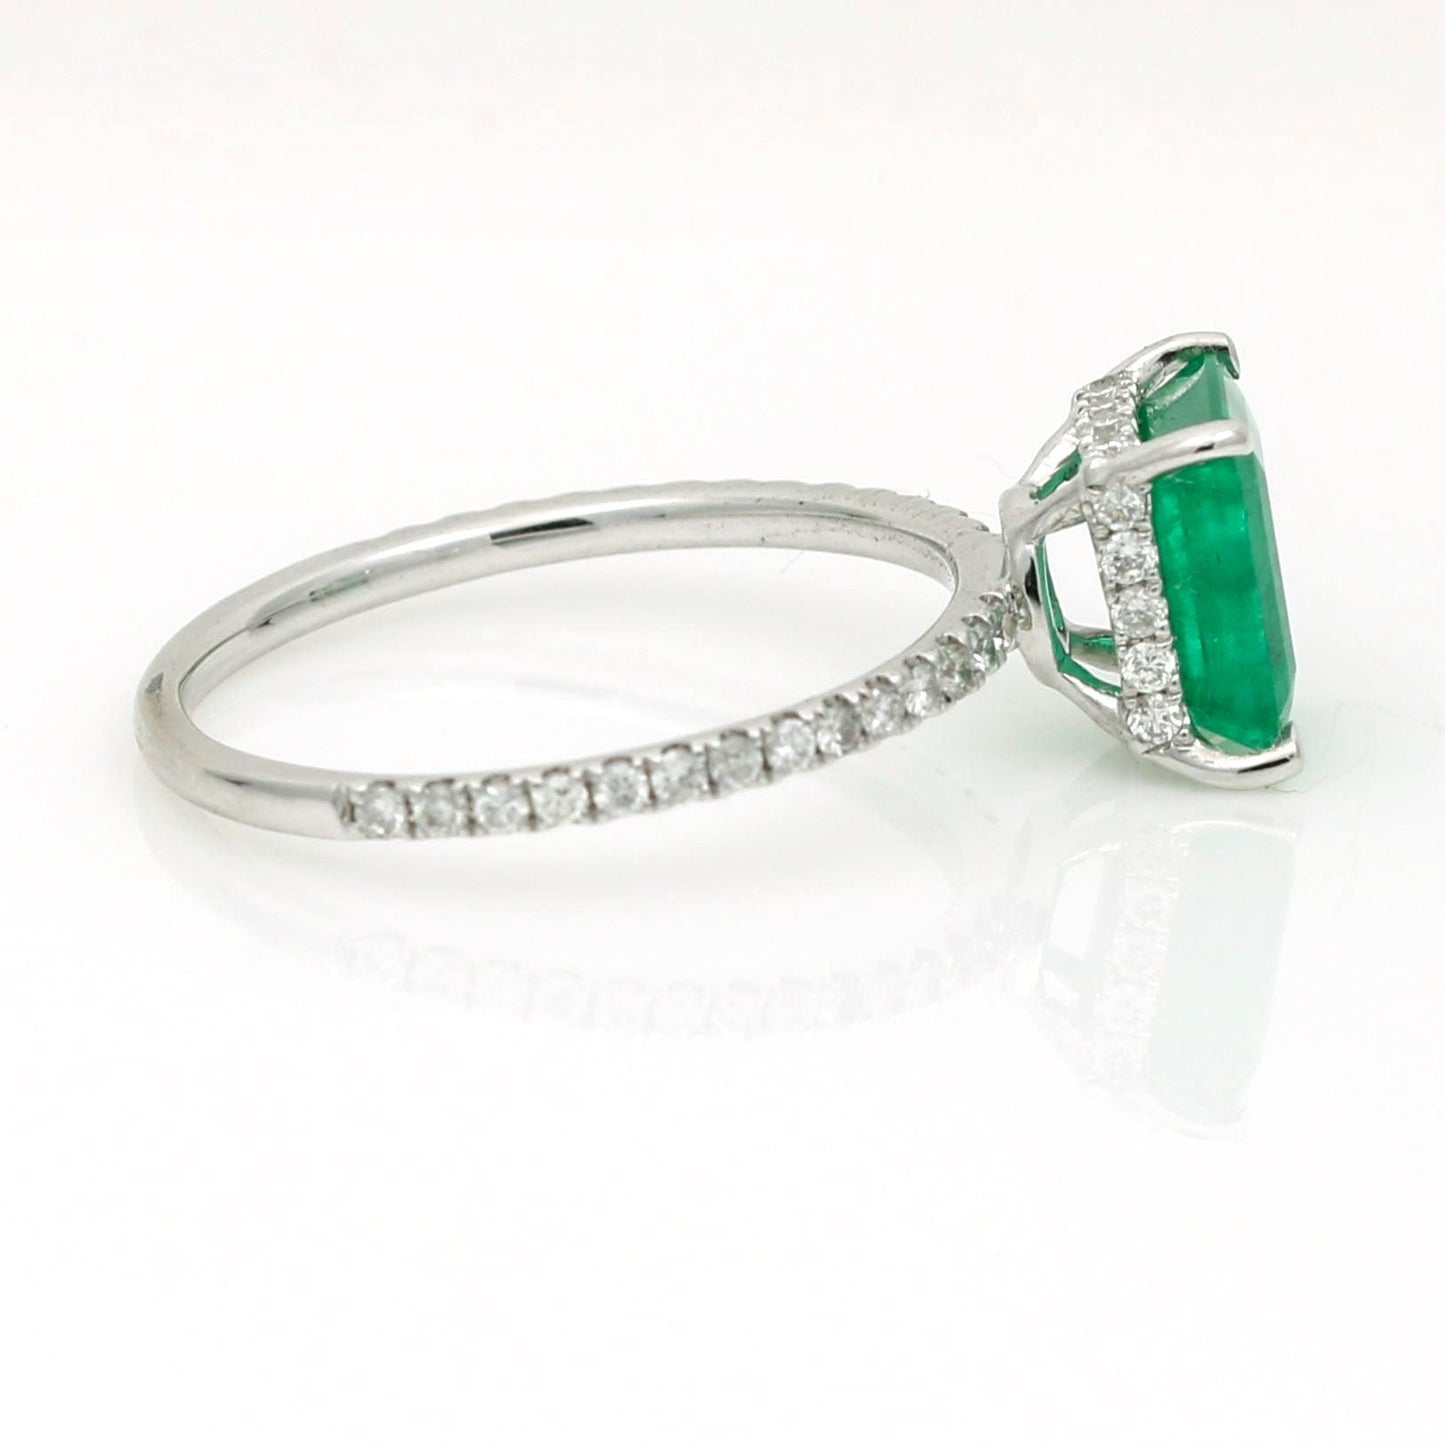 Women's Emerald Diamond Solitaire Ring in 18k White Gold - 31 Jewels Inc.